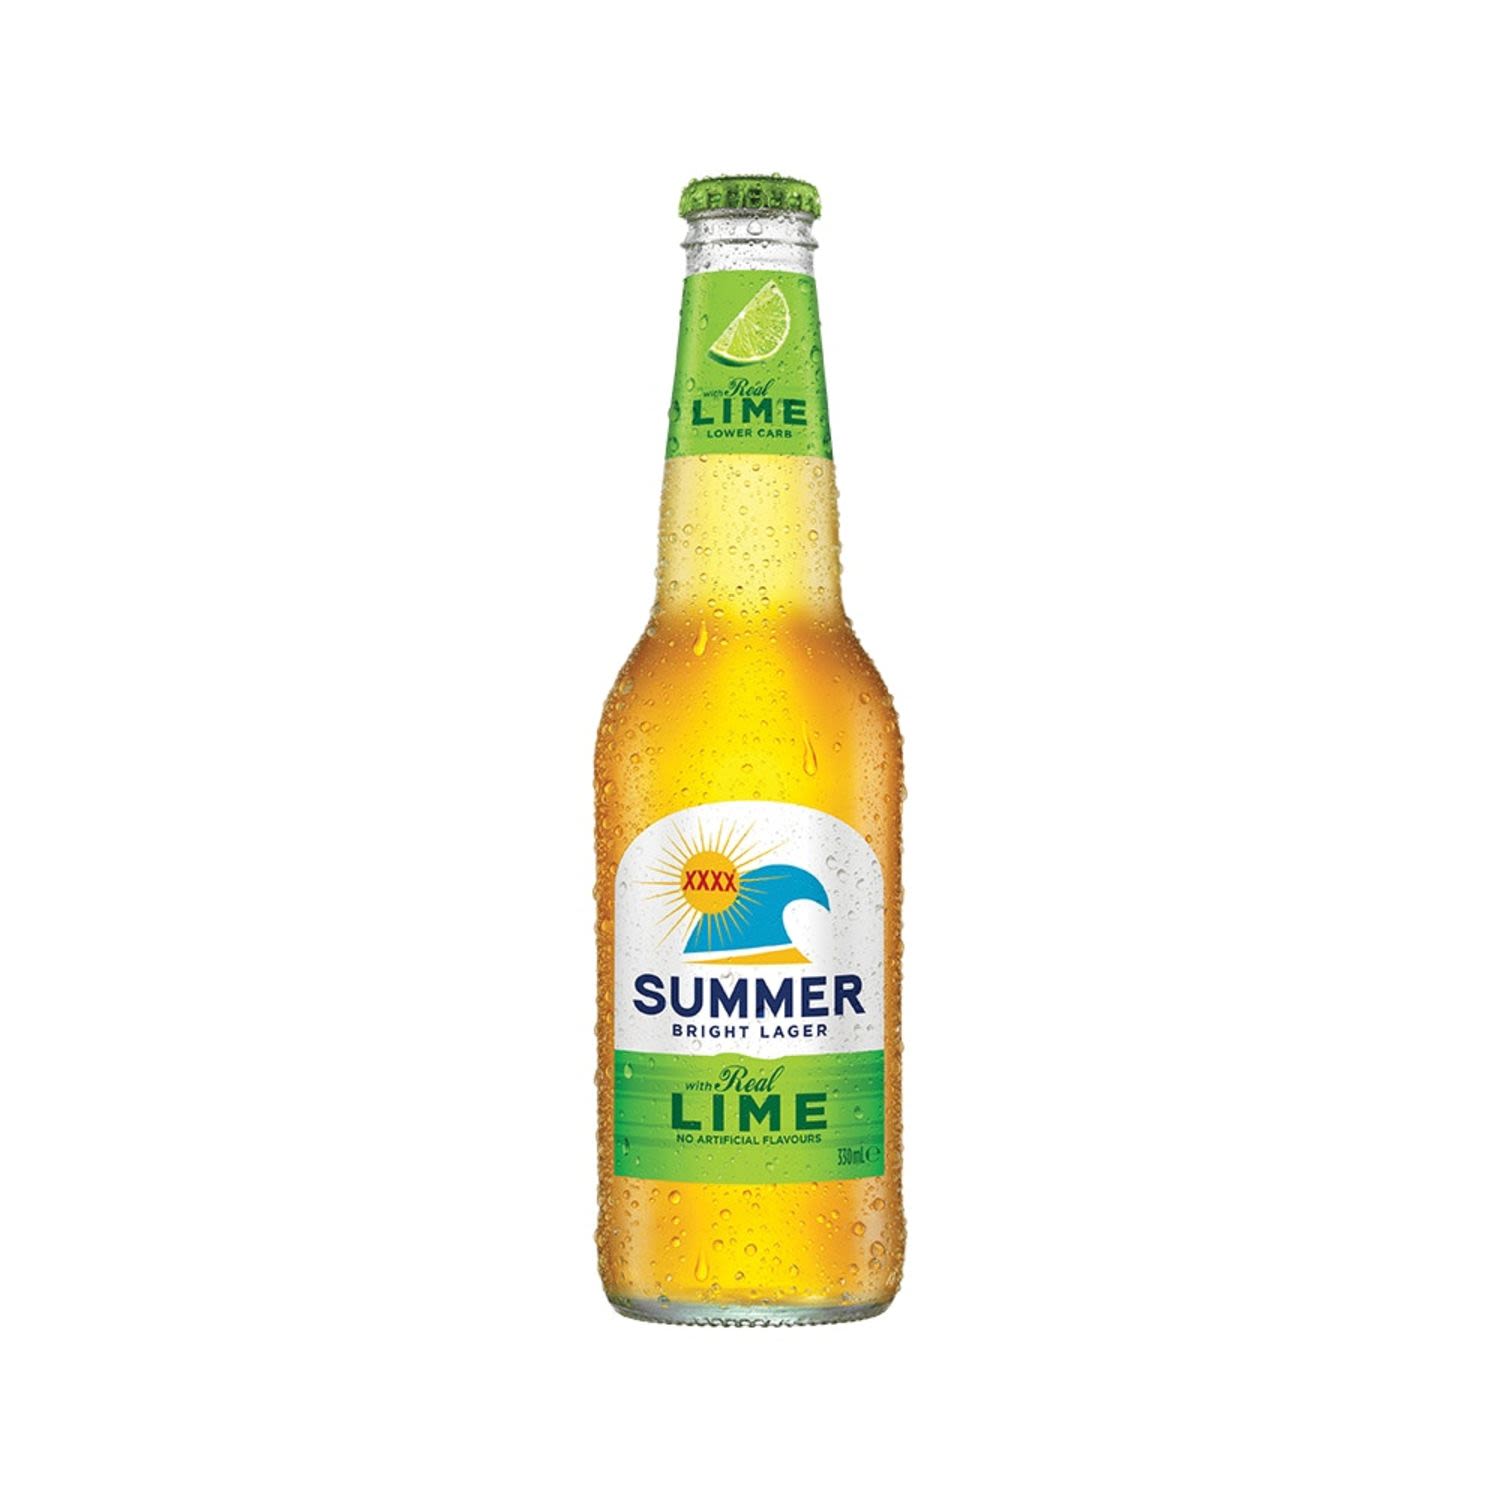 XXXX Summer Bright Lager with Natural Lime Bottle 330mL